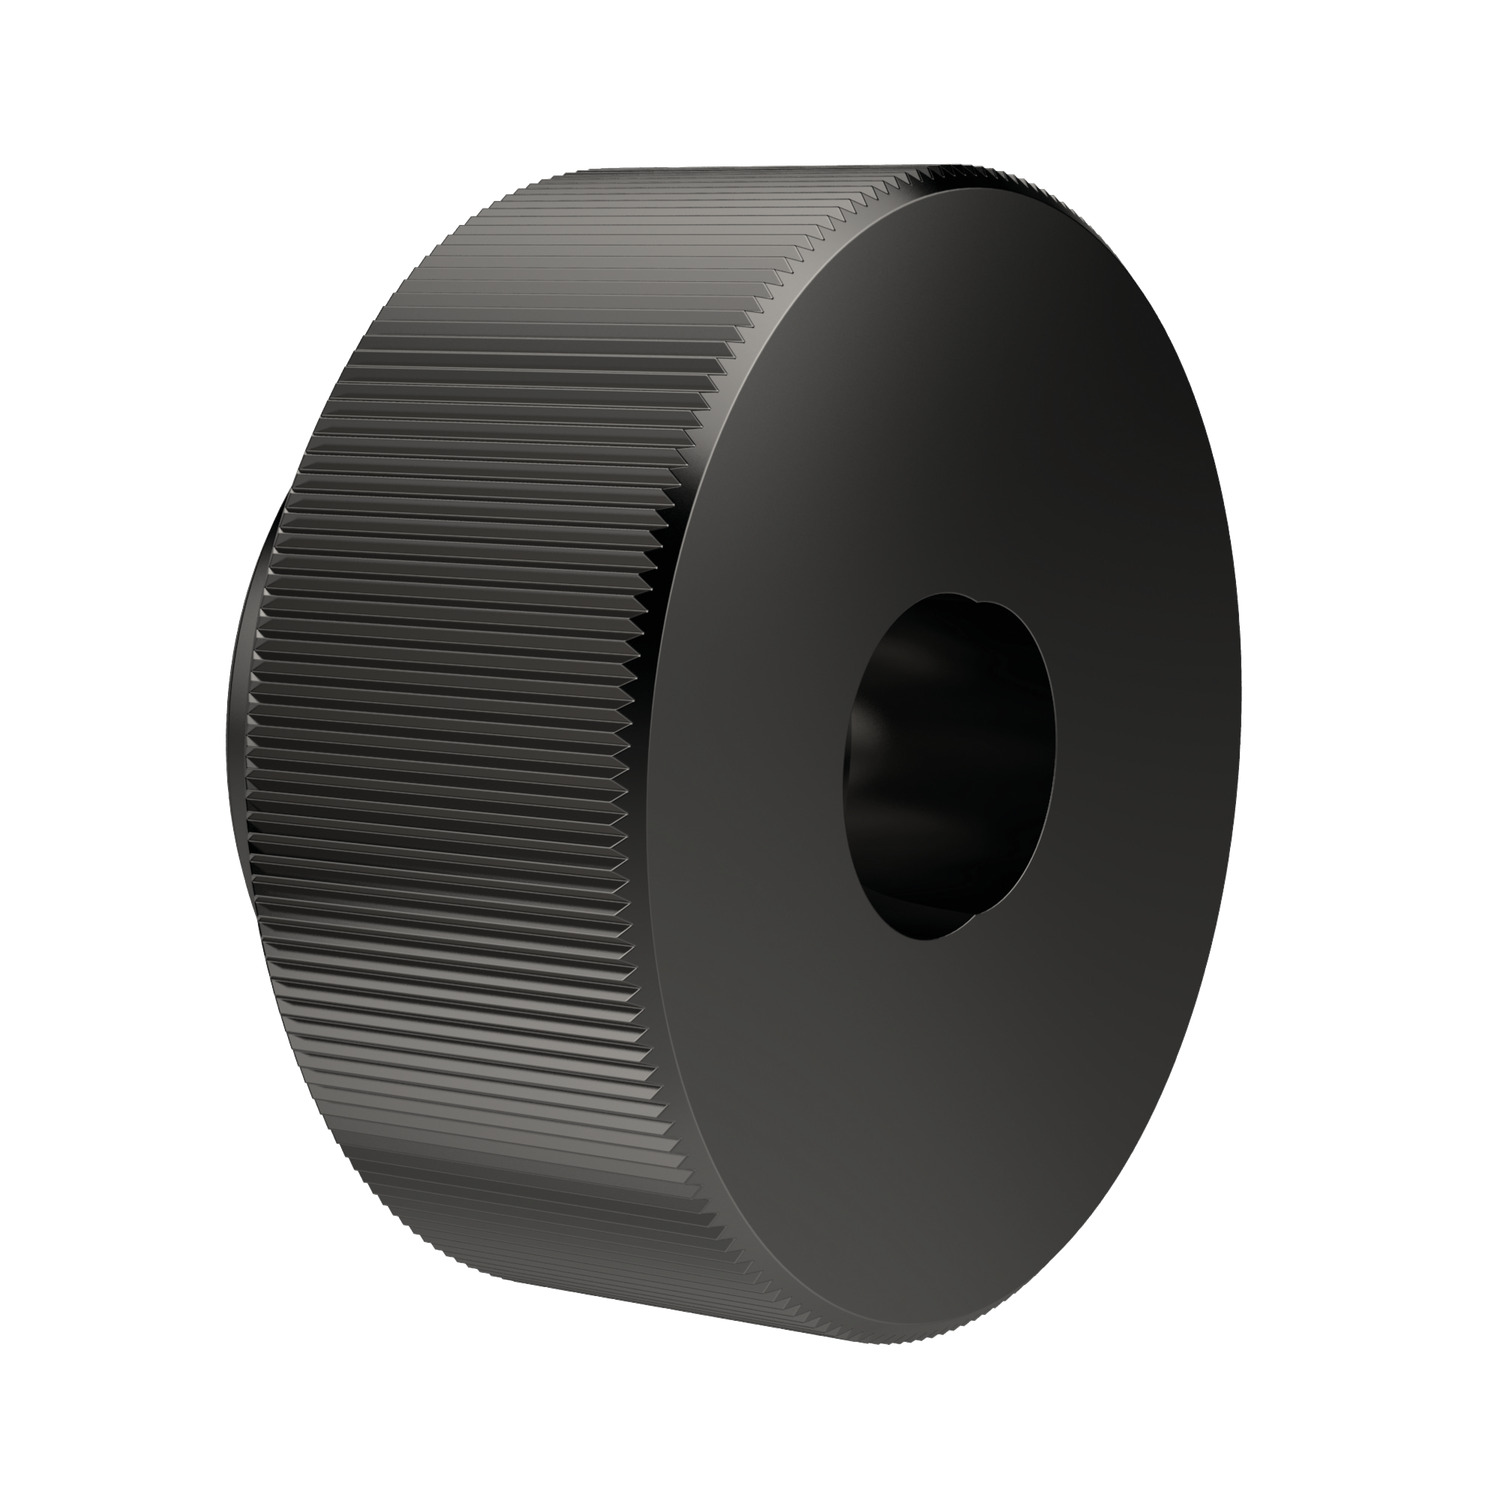 Quick Tightening Knurled Knob Utilising a slanted internal thread 37360 allows for rapid fastening compared to similar conventional knurled products.